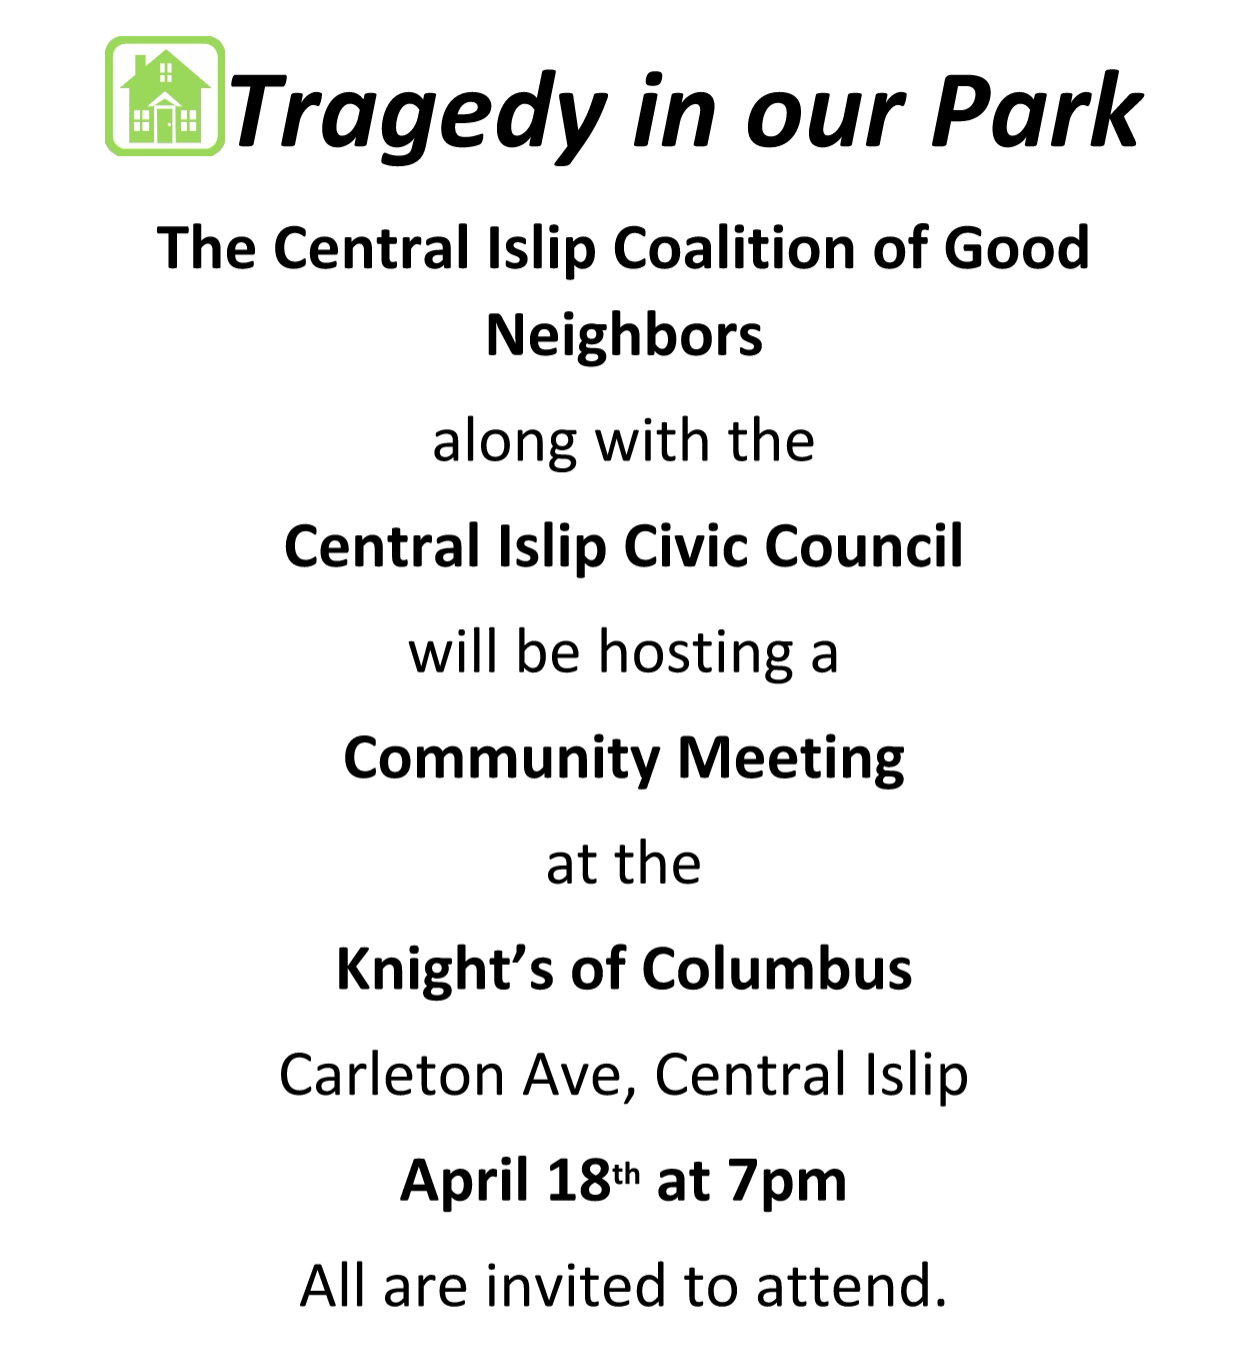 Tragedy in the Park 2017 - KoC Community Meeting